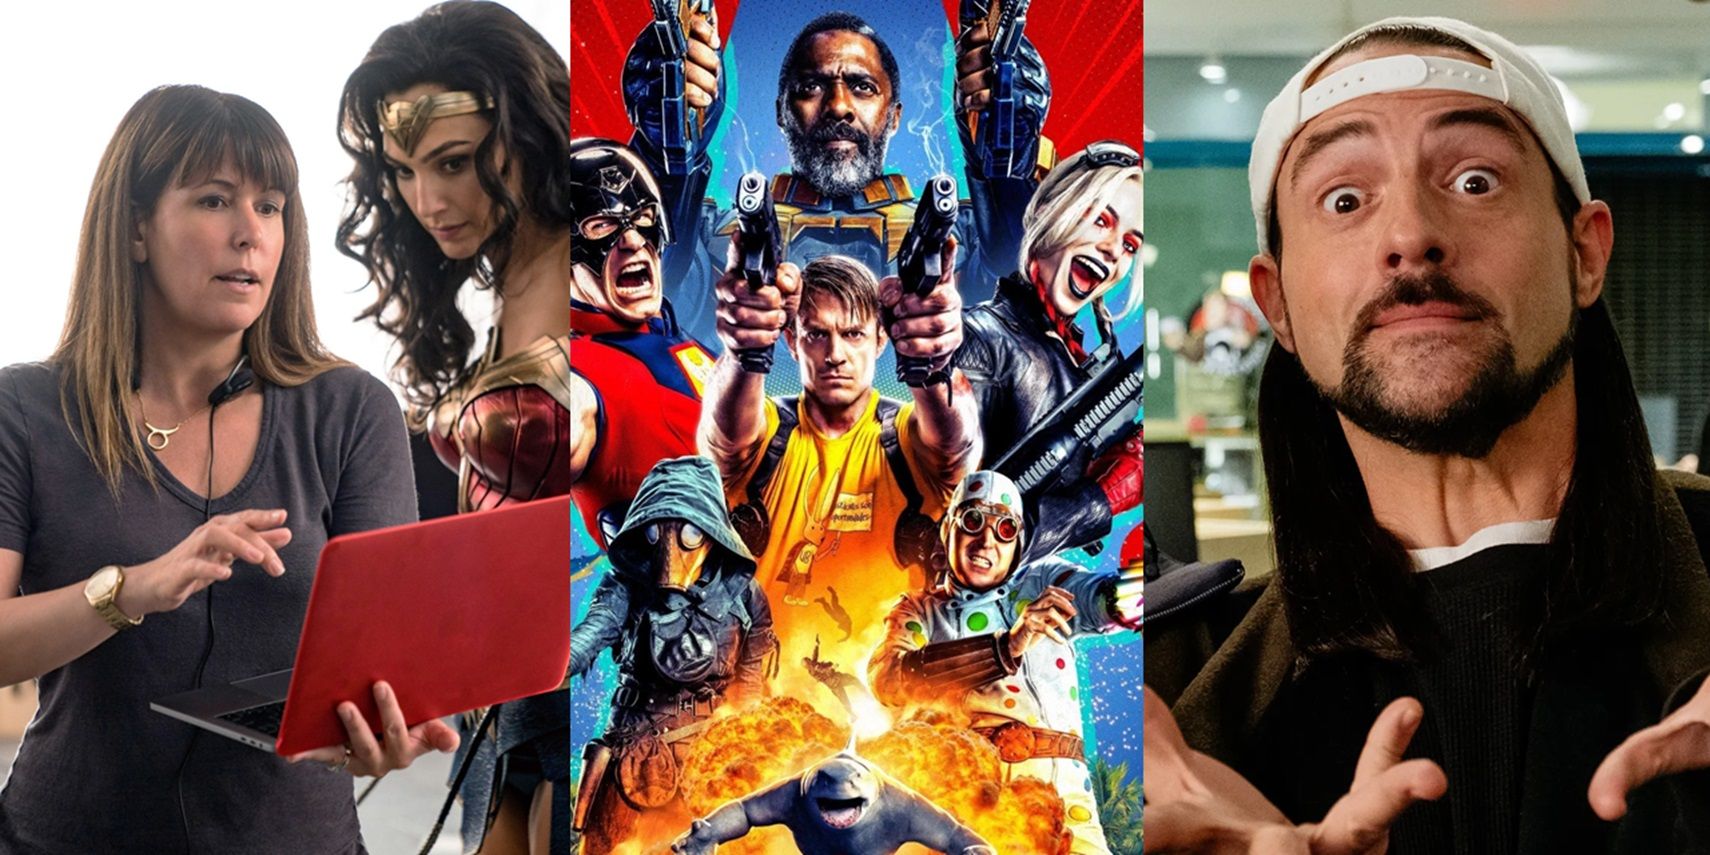 Patty Jenkins and Gal Gadot on the Wonder Woman set, The Suicide Squad poster, and Kevin Smith as Silent Bob